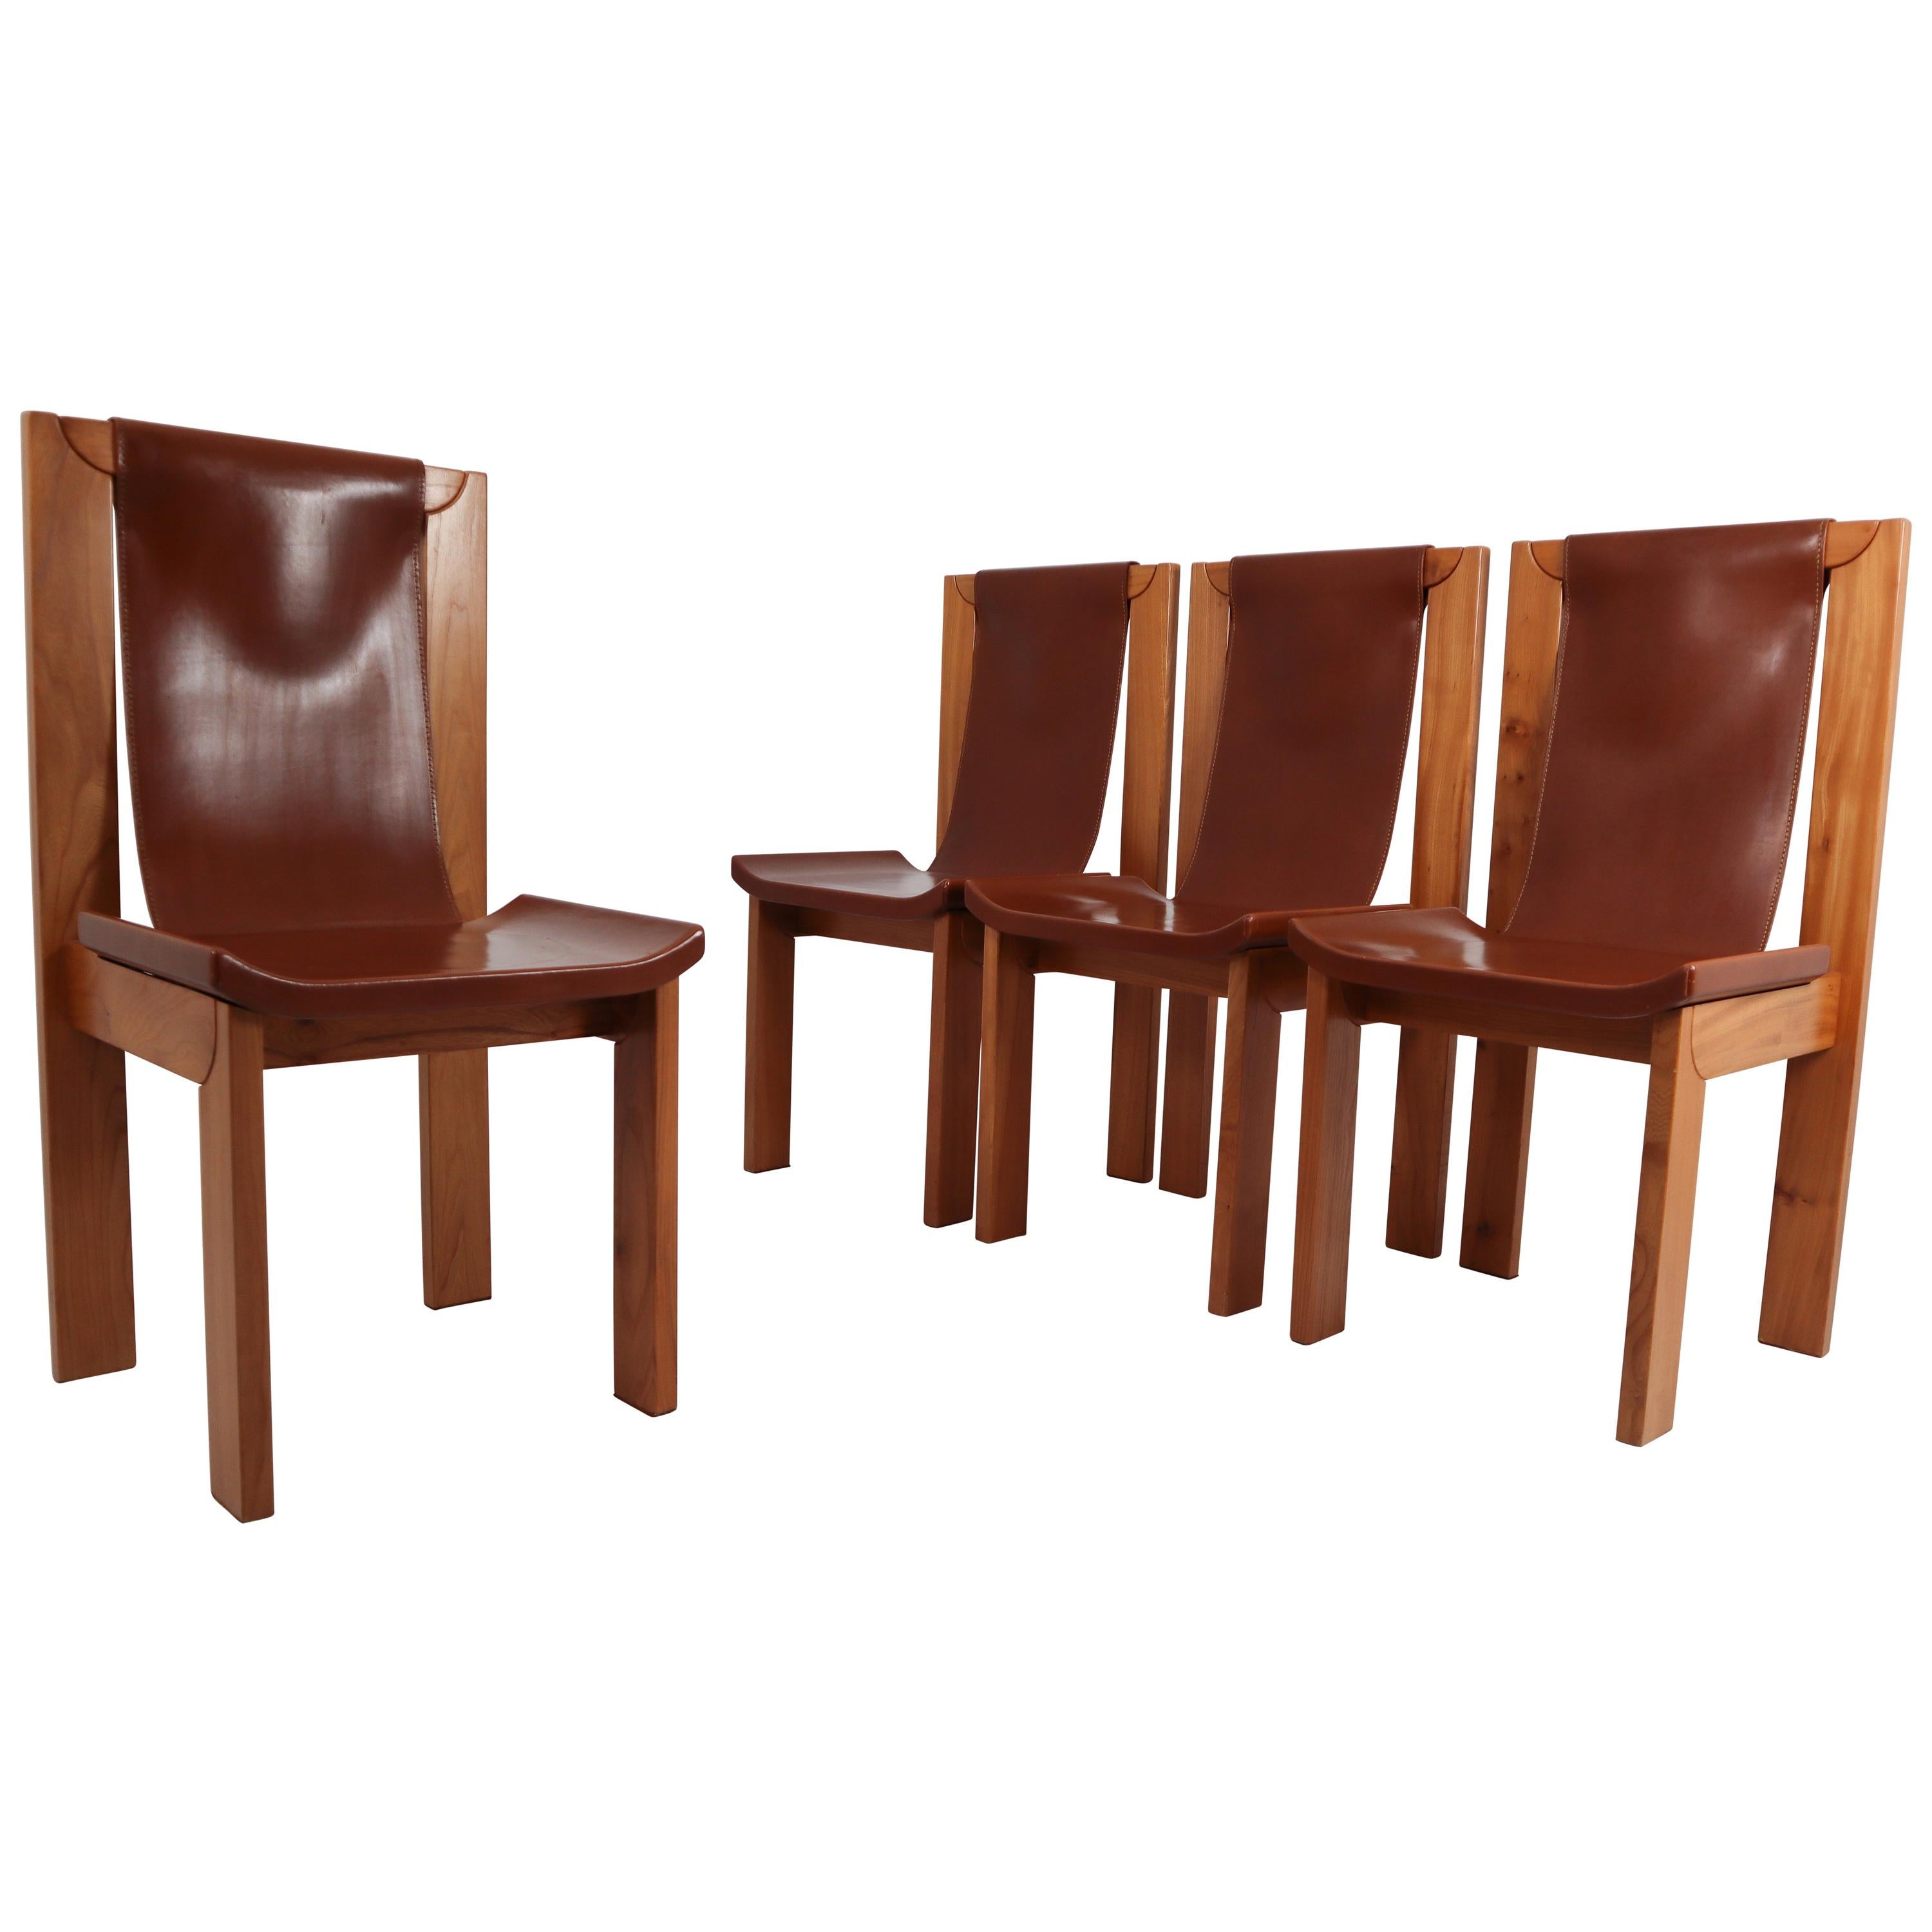 Set of Four Cognac Leather Dining Chairs in Elmwood, France, 1960s